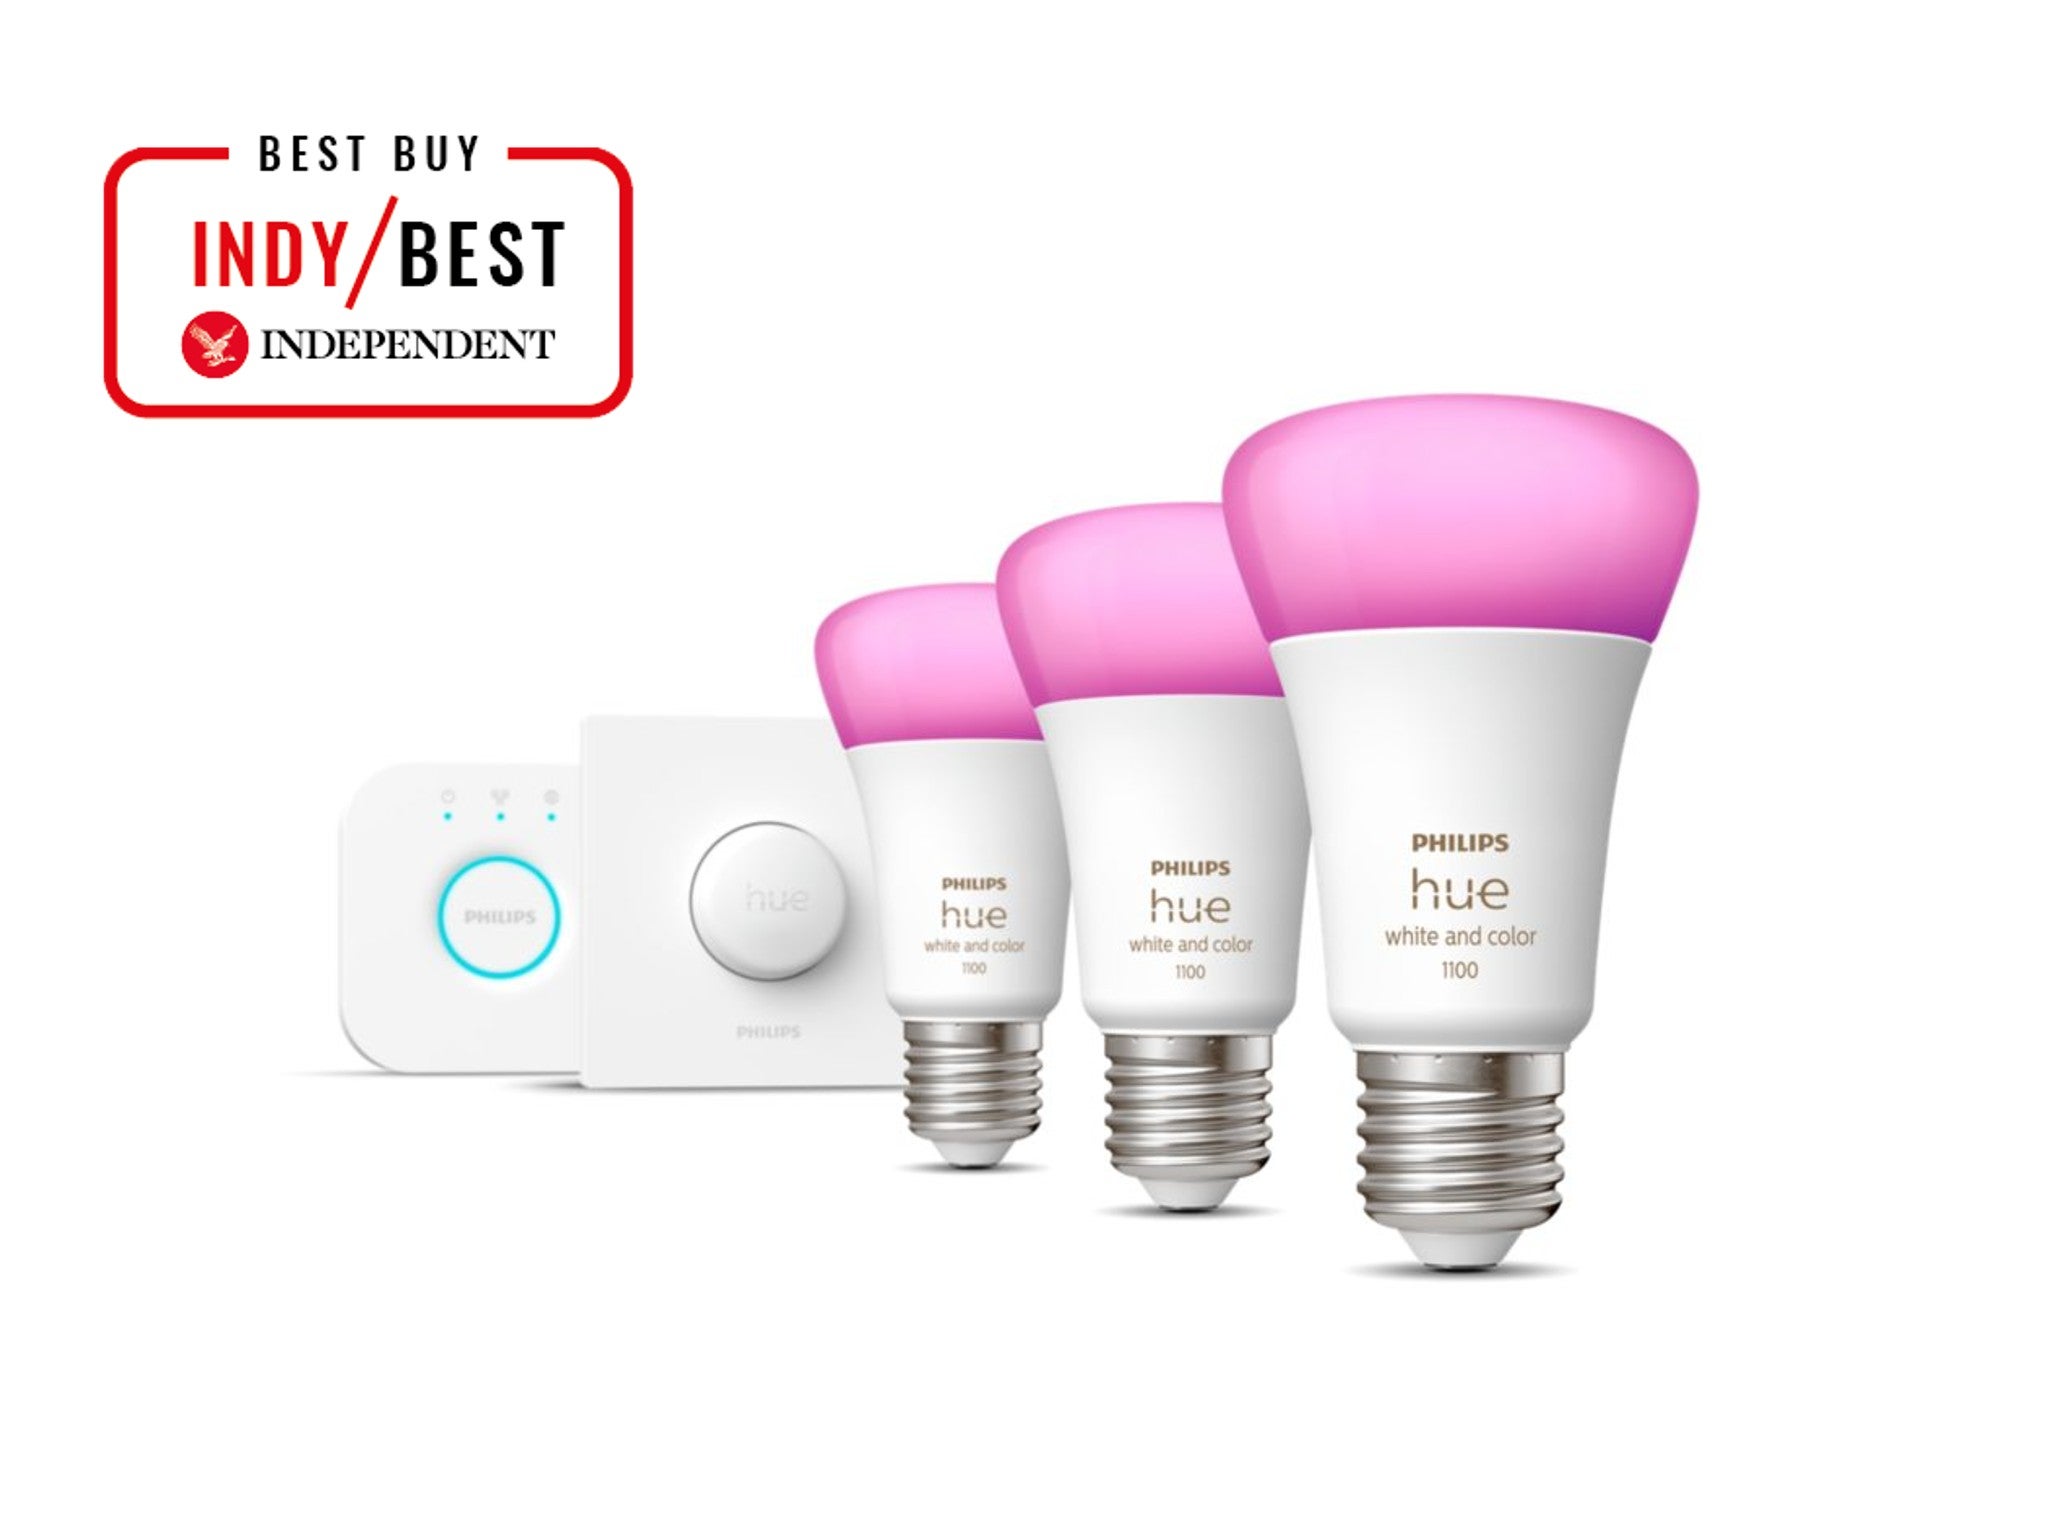 Philips Hue white and colour ambiance starter kit indybest.jpg